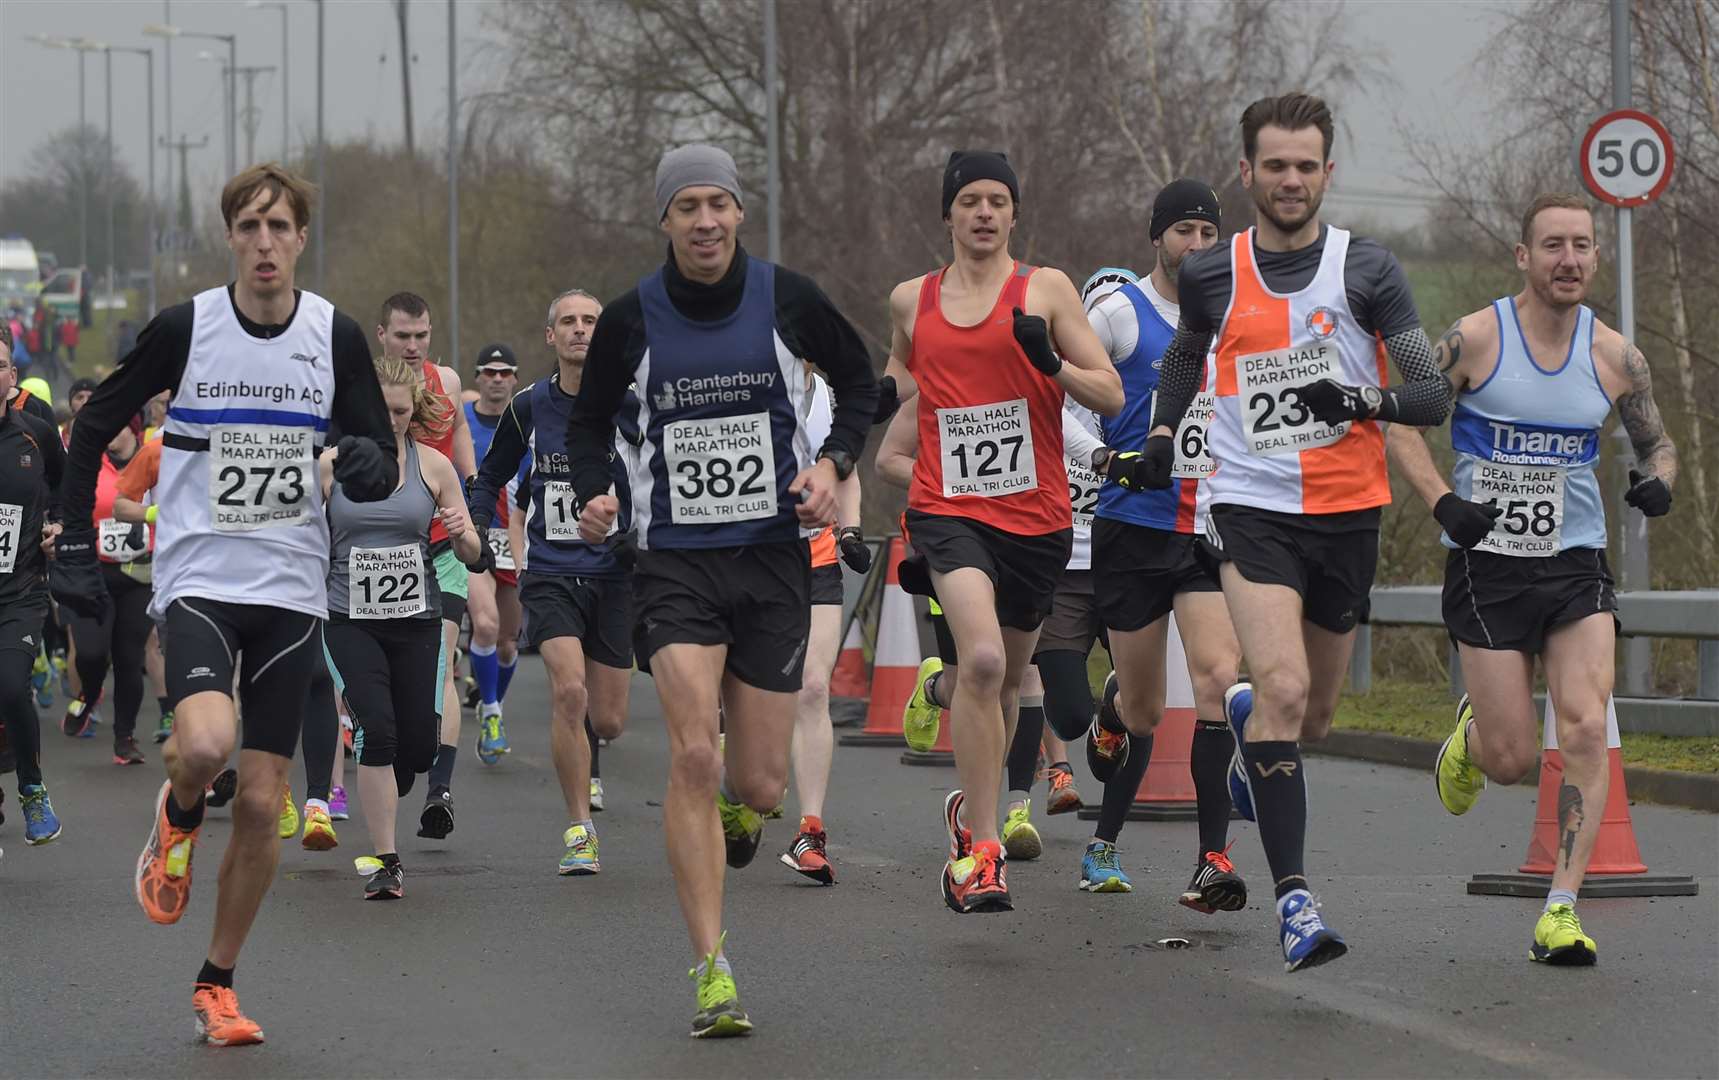 The Deal Half-Marathon takes in the villages of Betteshanger, Northbourne, Ripple, Sutton, East Langdon and Martin Mill. Picture: Tony Flashman (62488365)